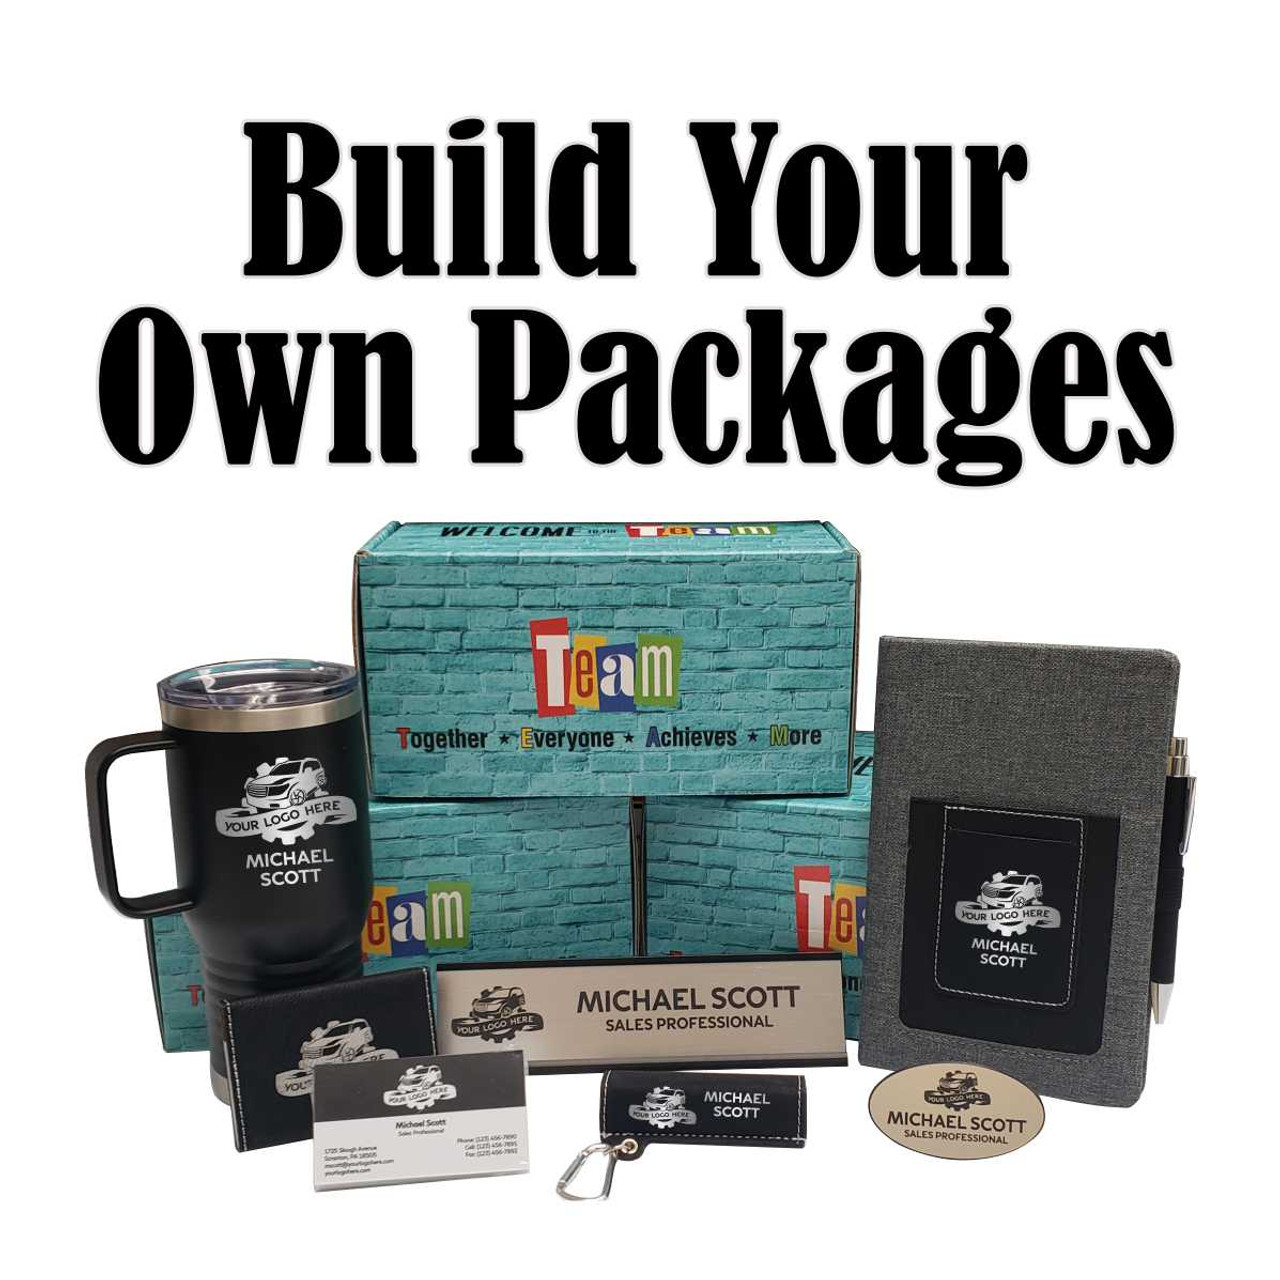 Build Your Own Packages